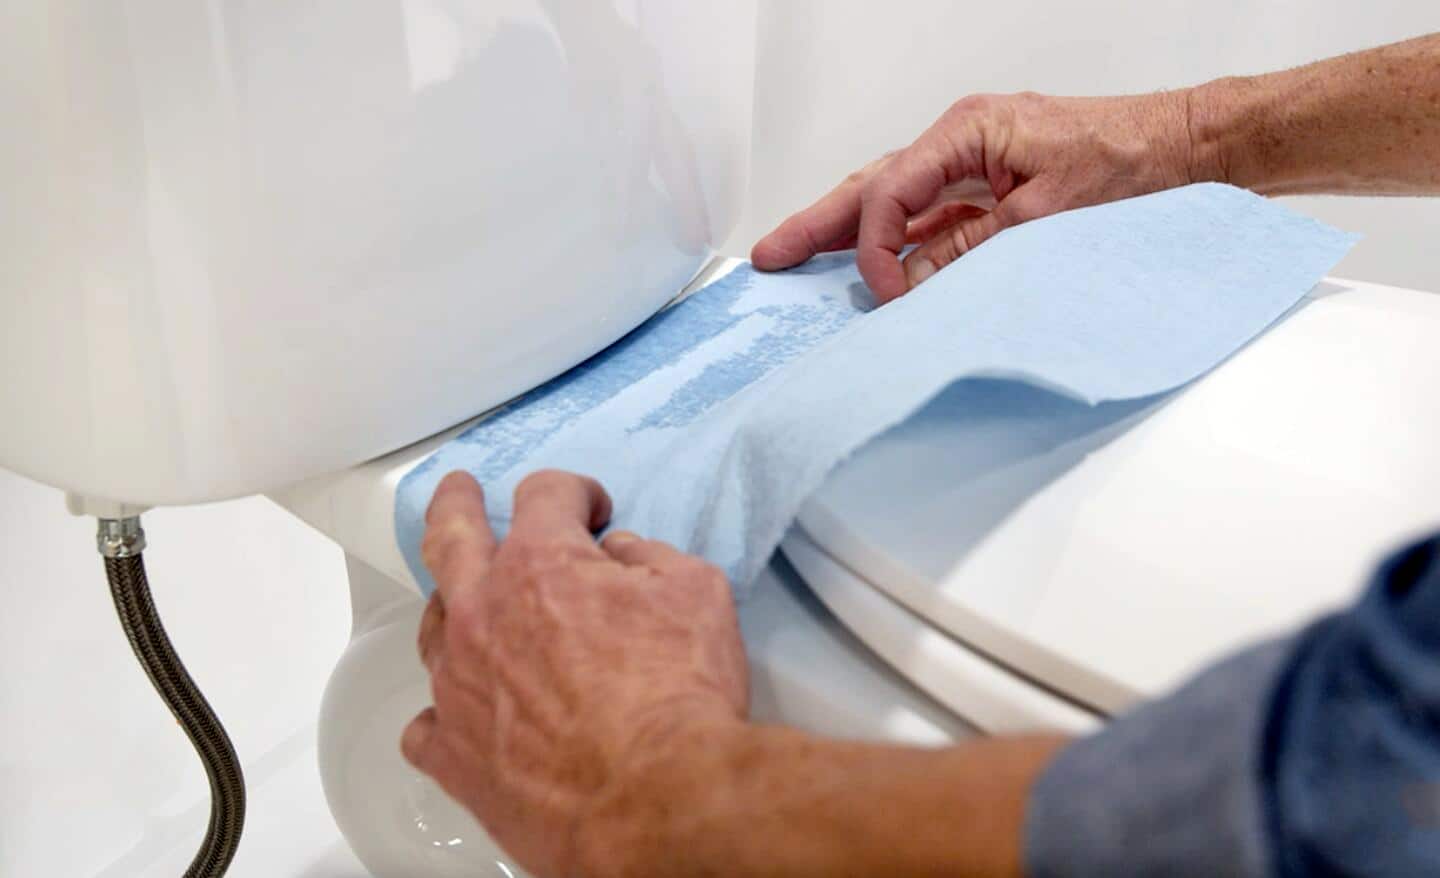 A man using a paper towel to find a water leak on a toilet.